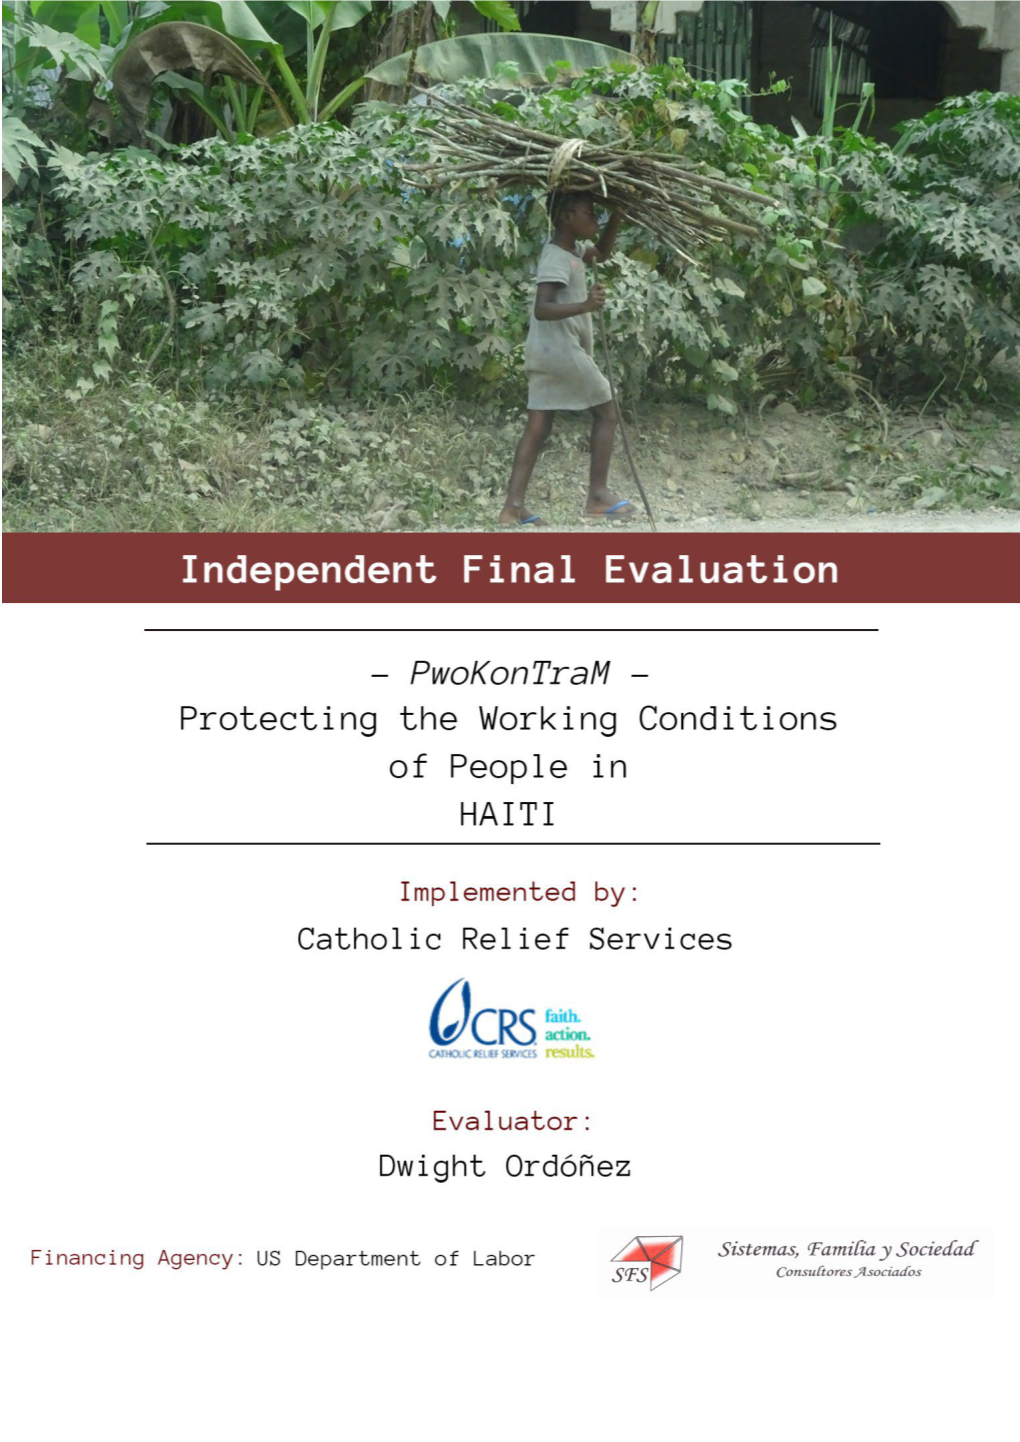 Final Evaluation of the Project: Protecting the Working Conditions of People in Haiti (Pwokontram) That Was Conducted Between November 12 and November 30, 2018